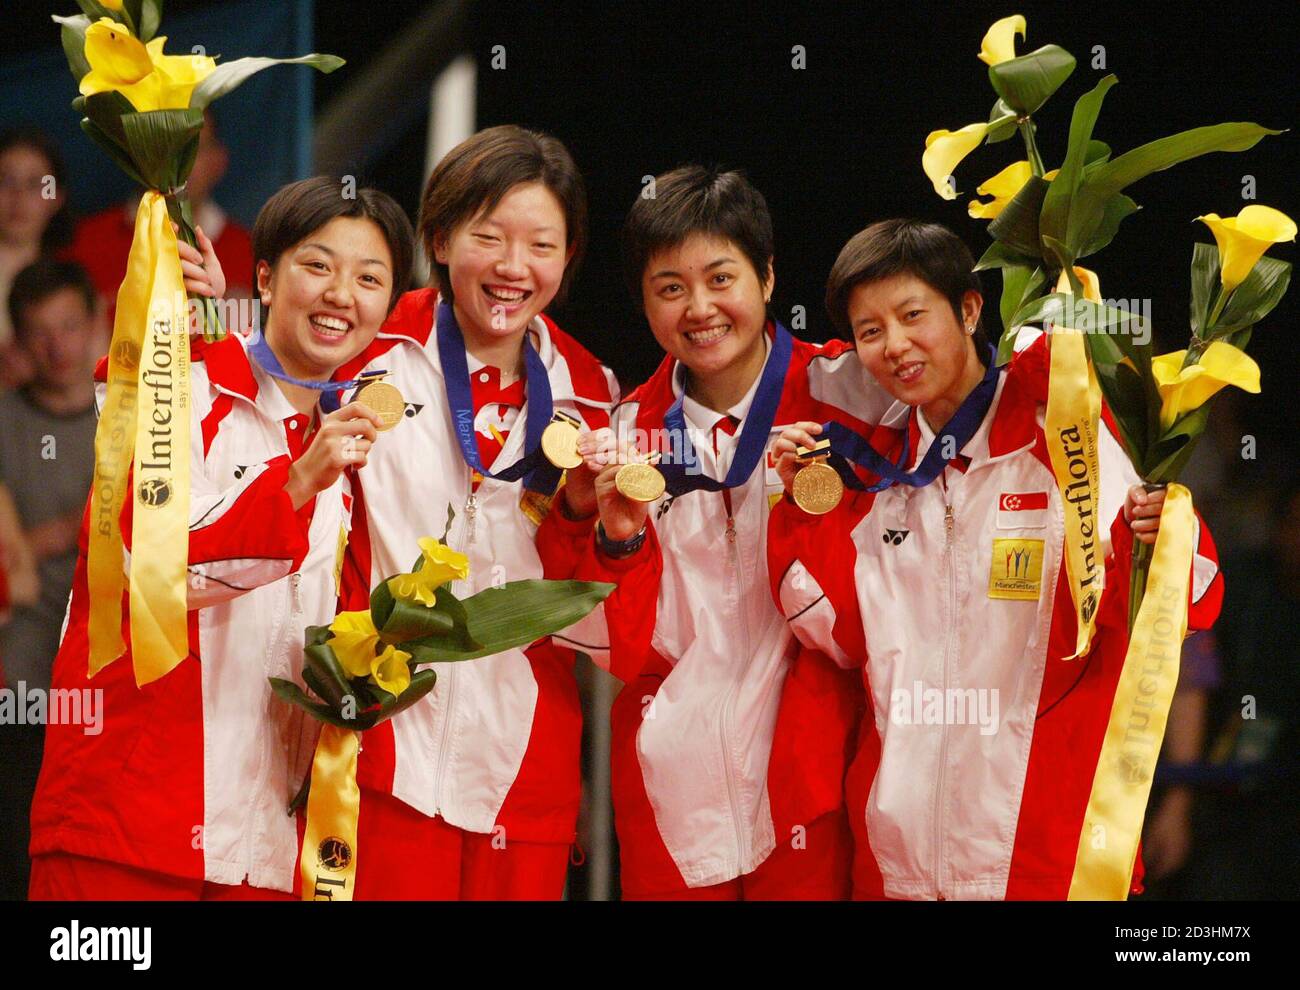 THE SINGAPORE WOMEN'S TABLE TENNIS TEAM CELEBRATE GOLD MEDAL VICTORY AT THE 2002  COMMONWEALTH GAMES IN MANCHESTER. Members of the Singapore women's table  tennis team (L-R) Xue Ling Zhang, Jia Wei Li,